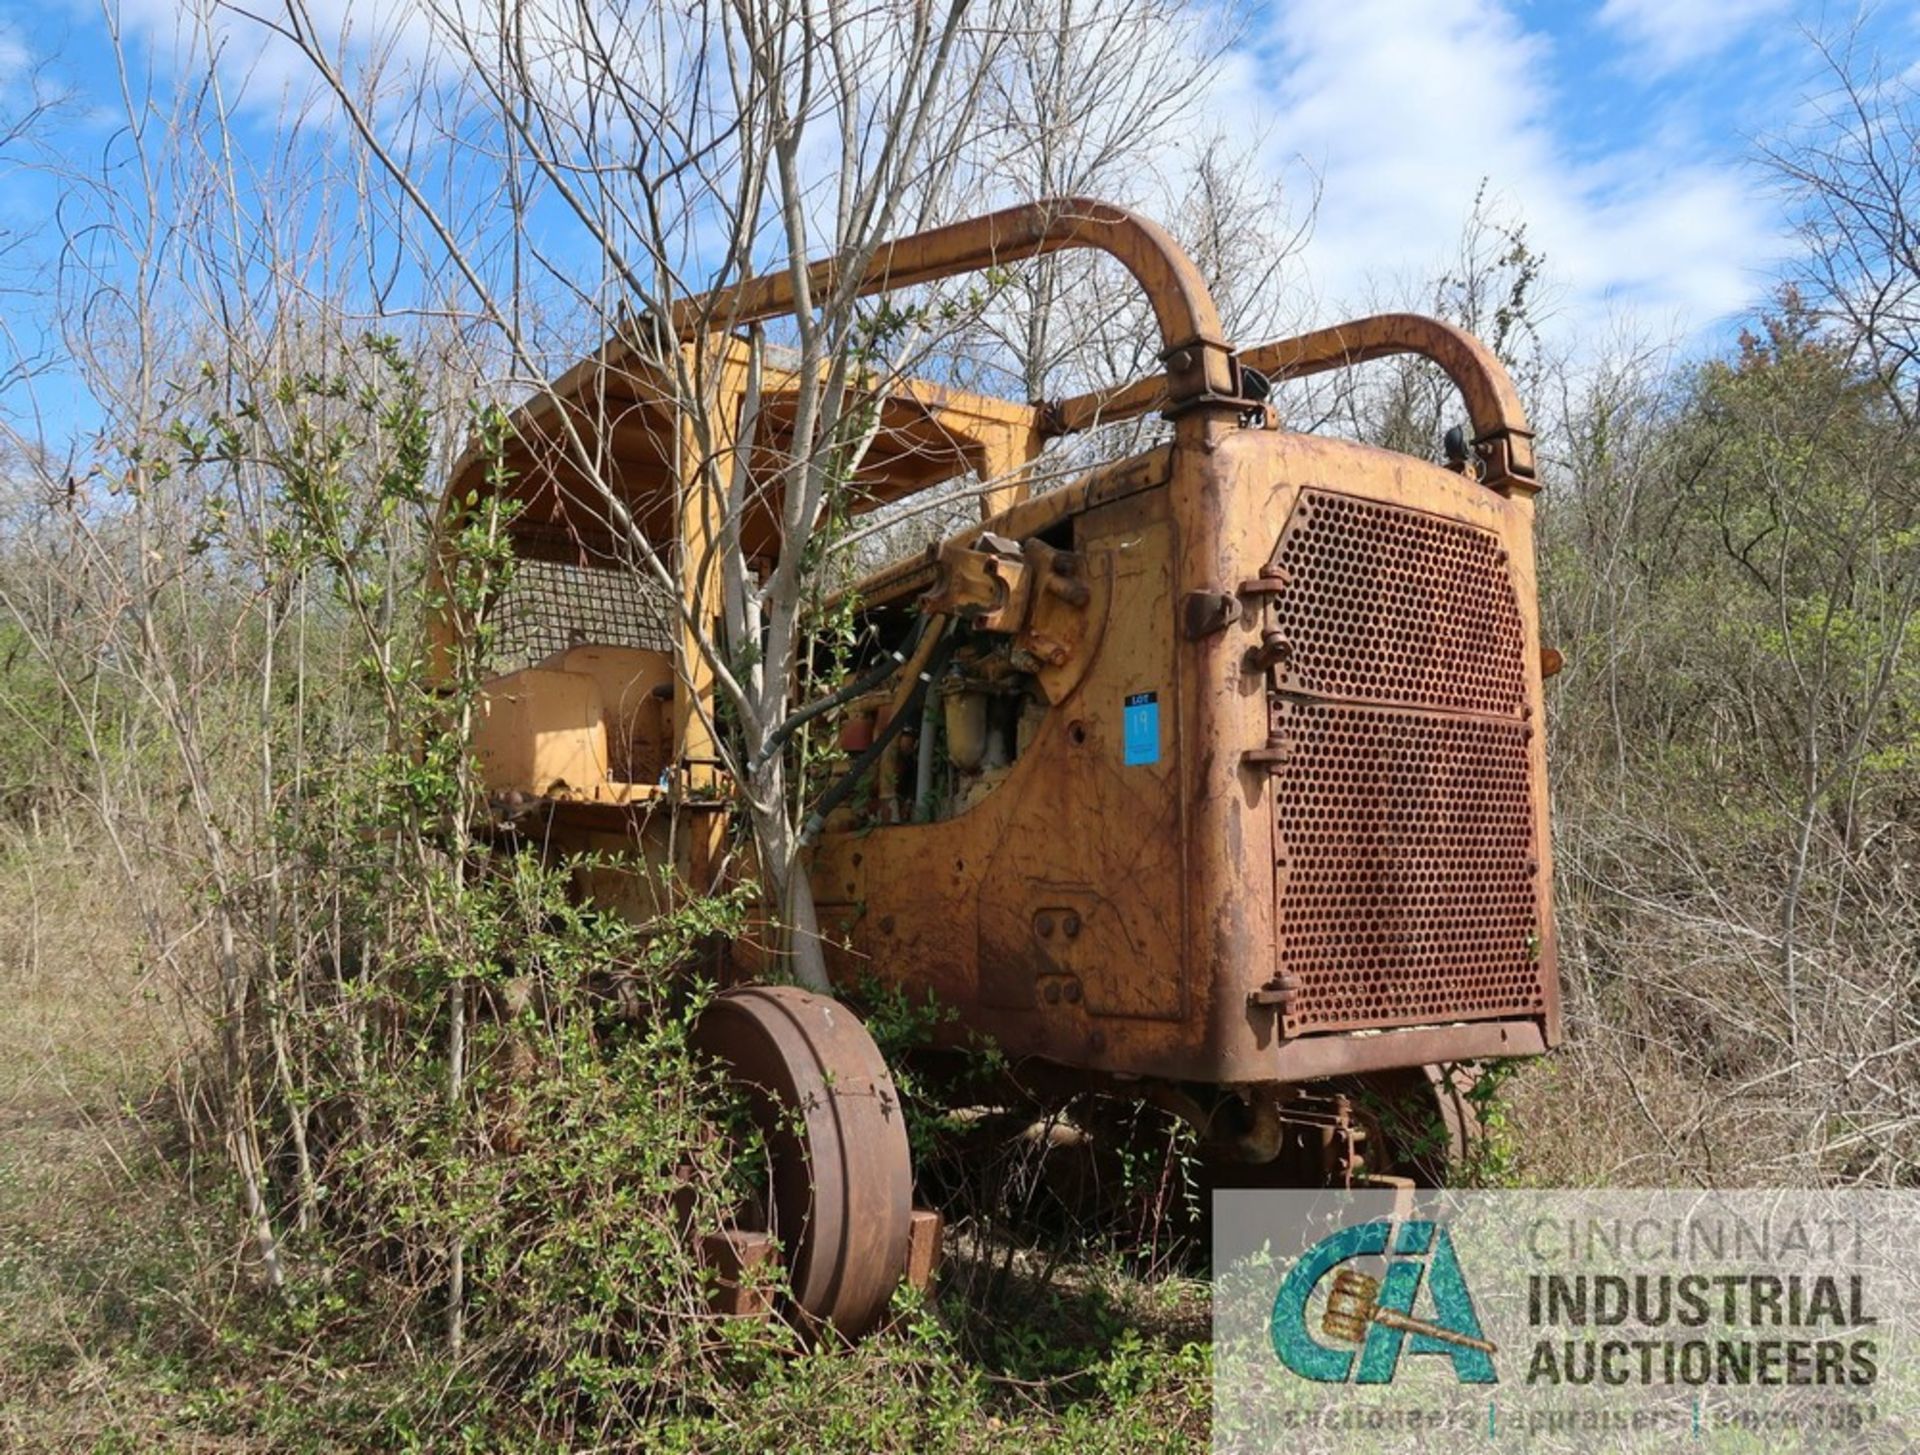 CATERPILLAR MODEL D8H PARTED-OUT CRAWLER DOZIER; S/N N/A, PARTS ONLY DOZIER **LOCATED AT 900 LICKING